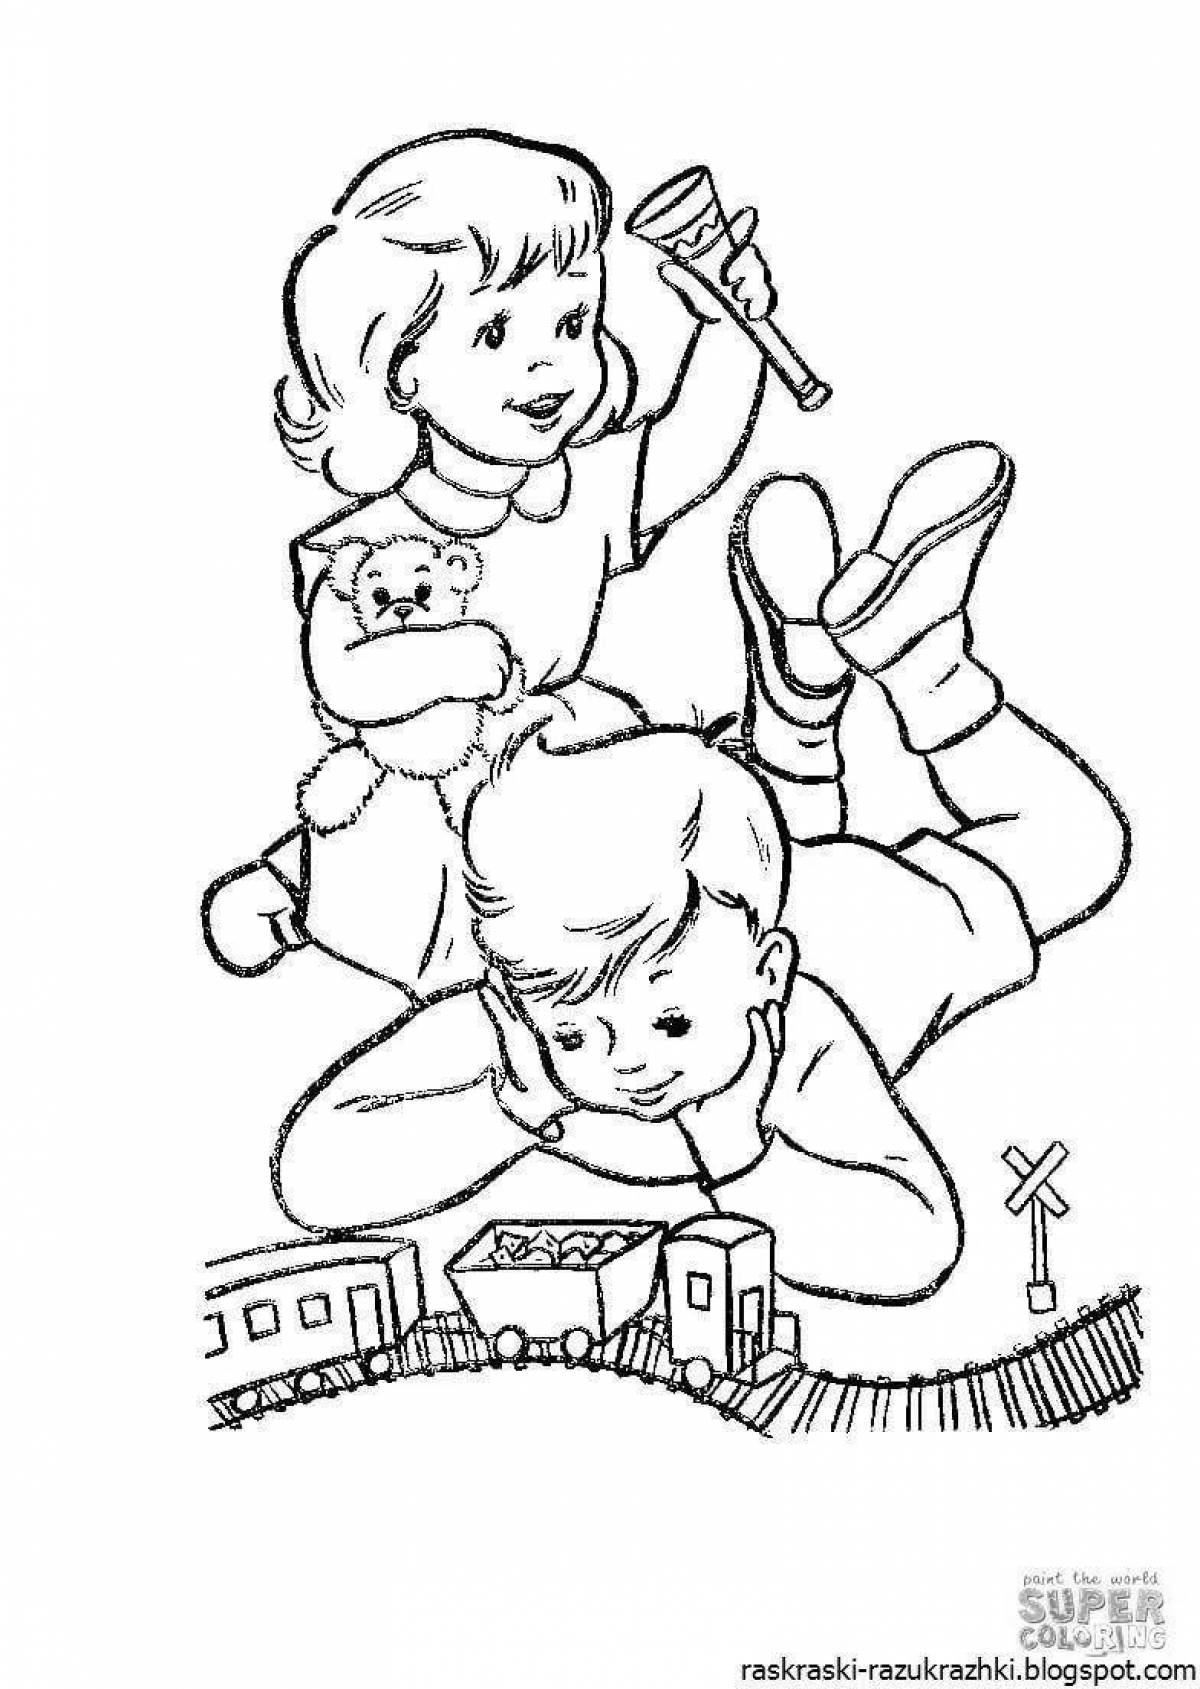 Funny children's coloring pages